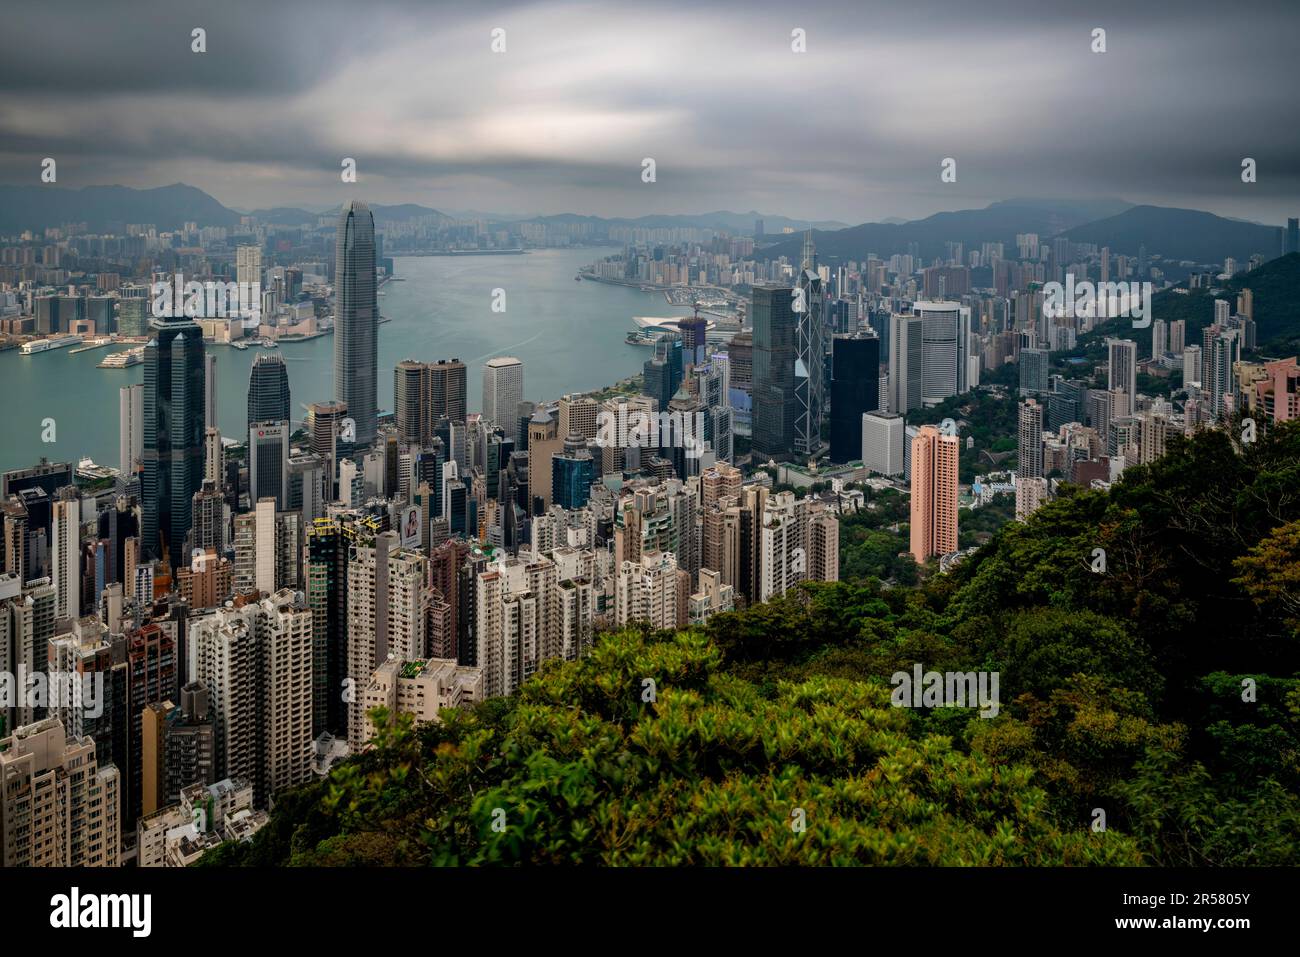 An Elevated View of The Hong Kong Skyline Taken From The Peak, Hong Kong, China. Stock Photo